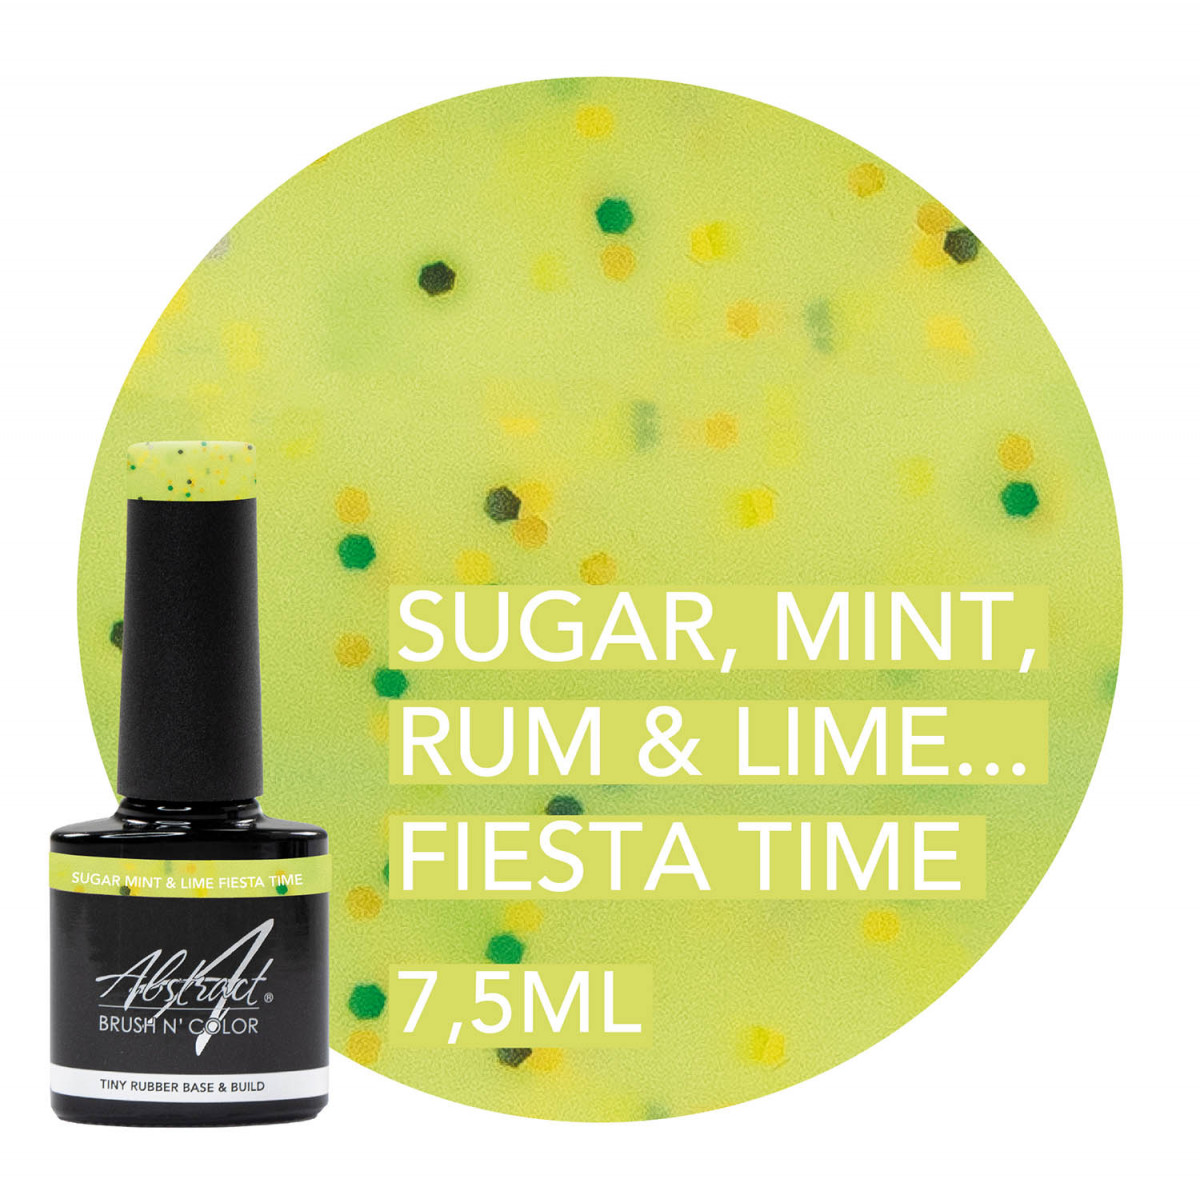 Sugar Mint Rum and Lime Fiesta Time - TINY Rubber Base & Build Gel Abstract